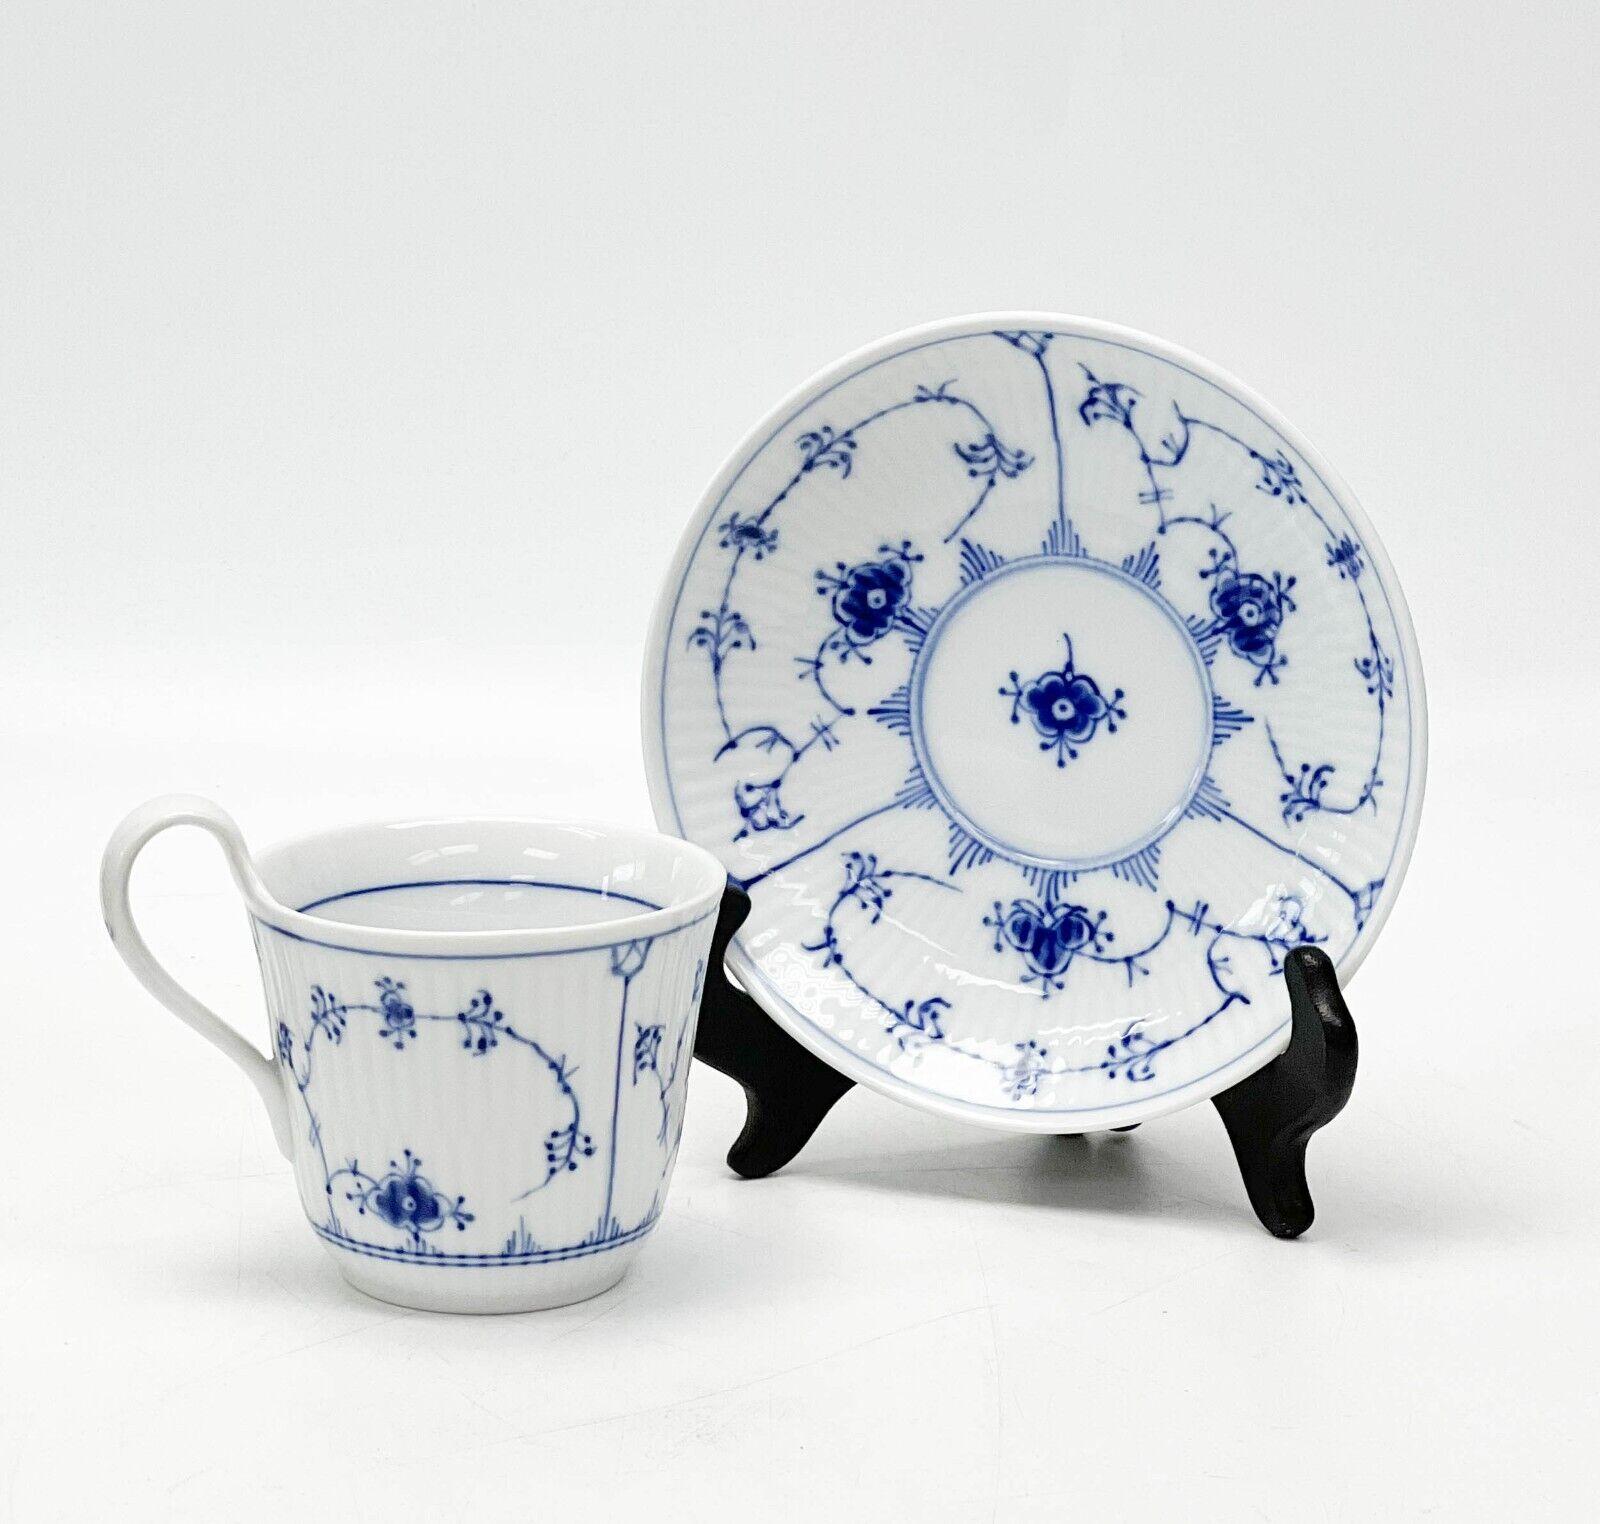  0 Royal Copenhagen Denmark blue fluted porcelain cups & saucers #093 / #094. Fluted porcelain with a delicate blue floral design. Royal Copenhagen marks to the underside

Additional Information: 
Type: Cup and Saucers
Composition: Porcelain
Weight